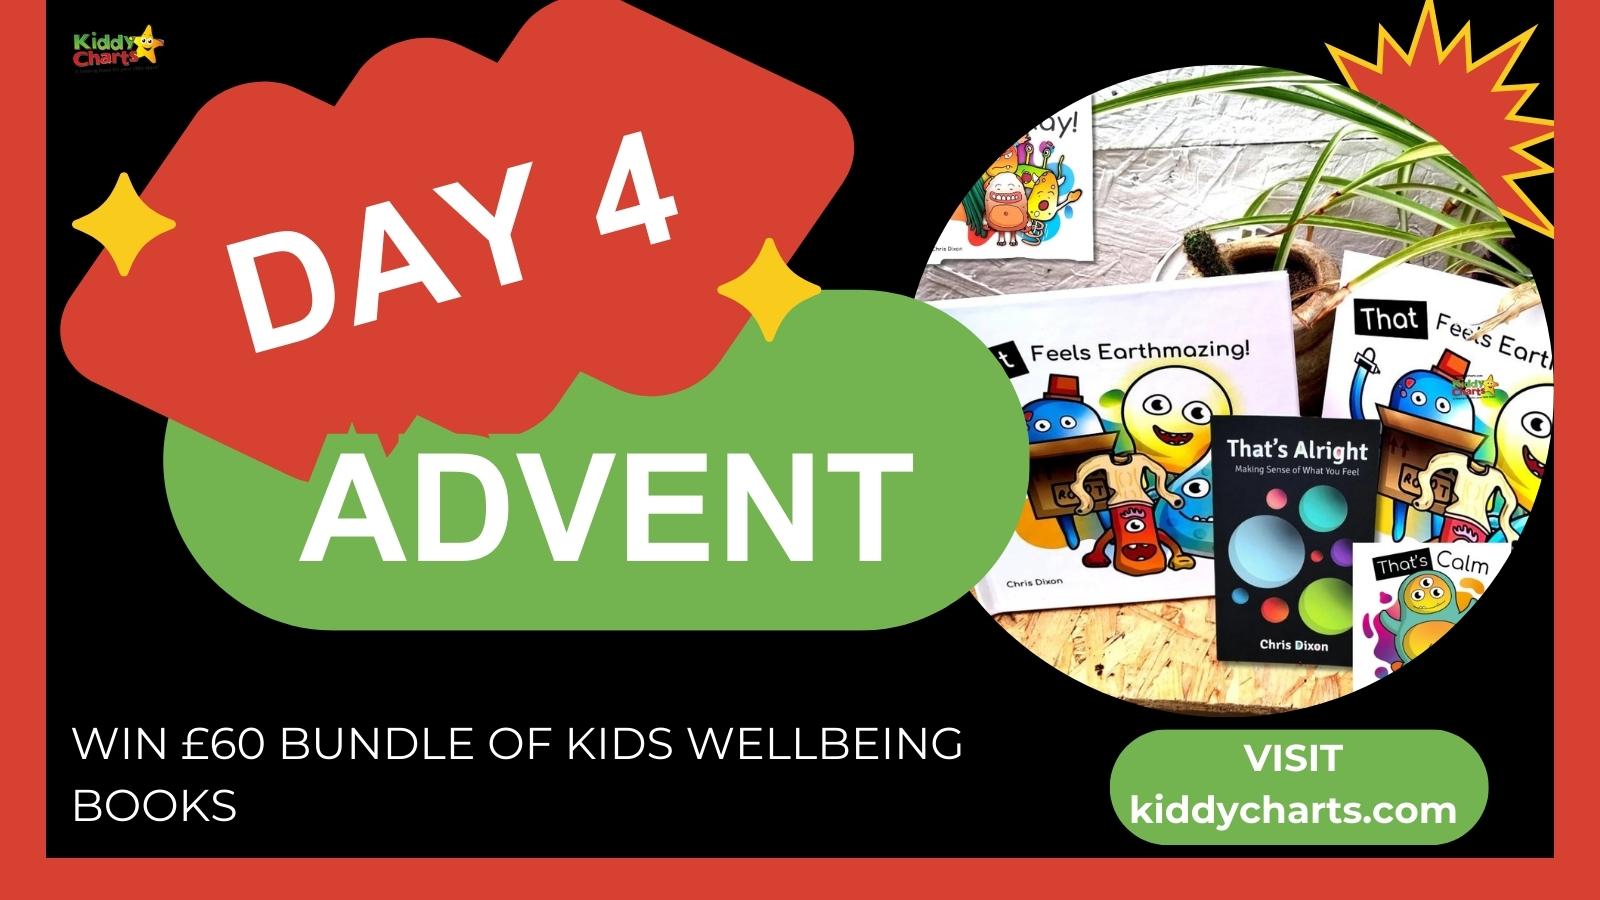 Day 4: Win an amazing bundle of wellbeing books for kids #KiddyChartsAdvent